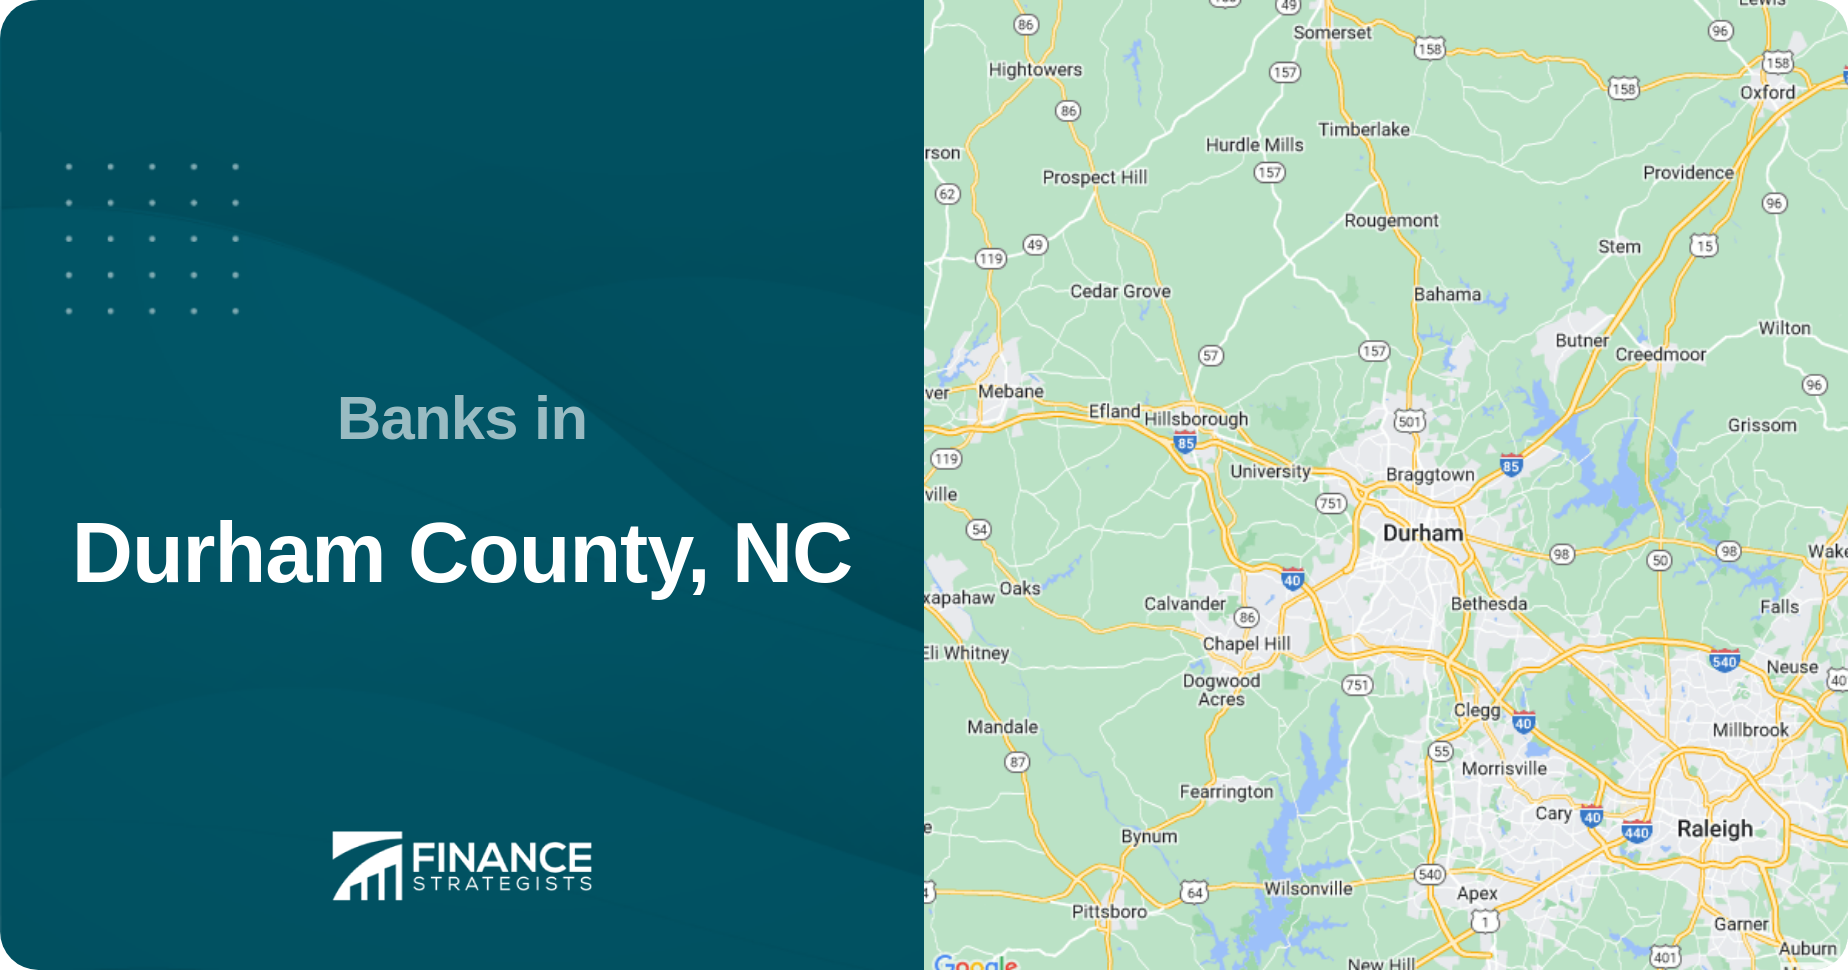 Banks in Durham County, NC